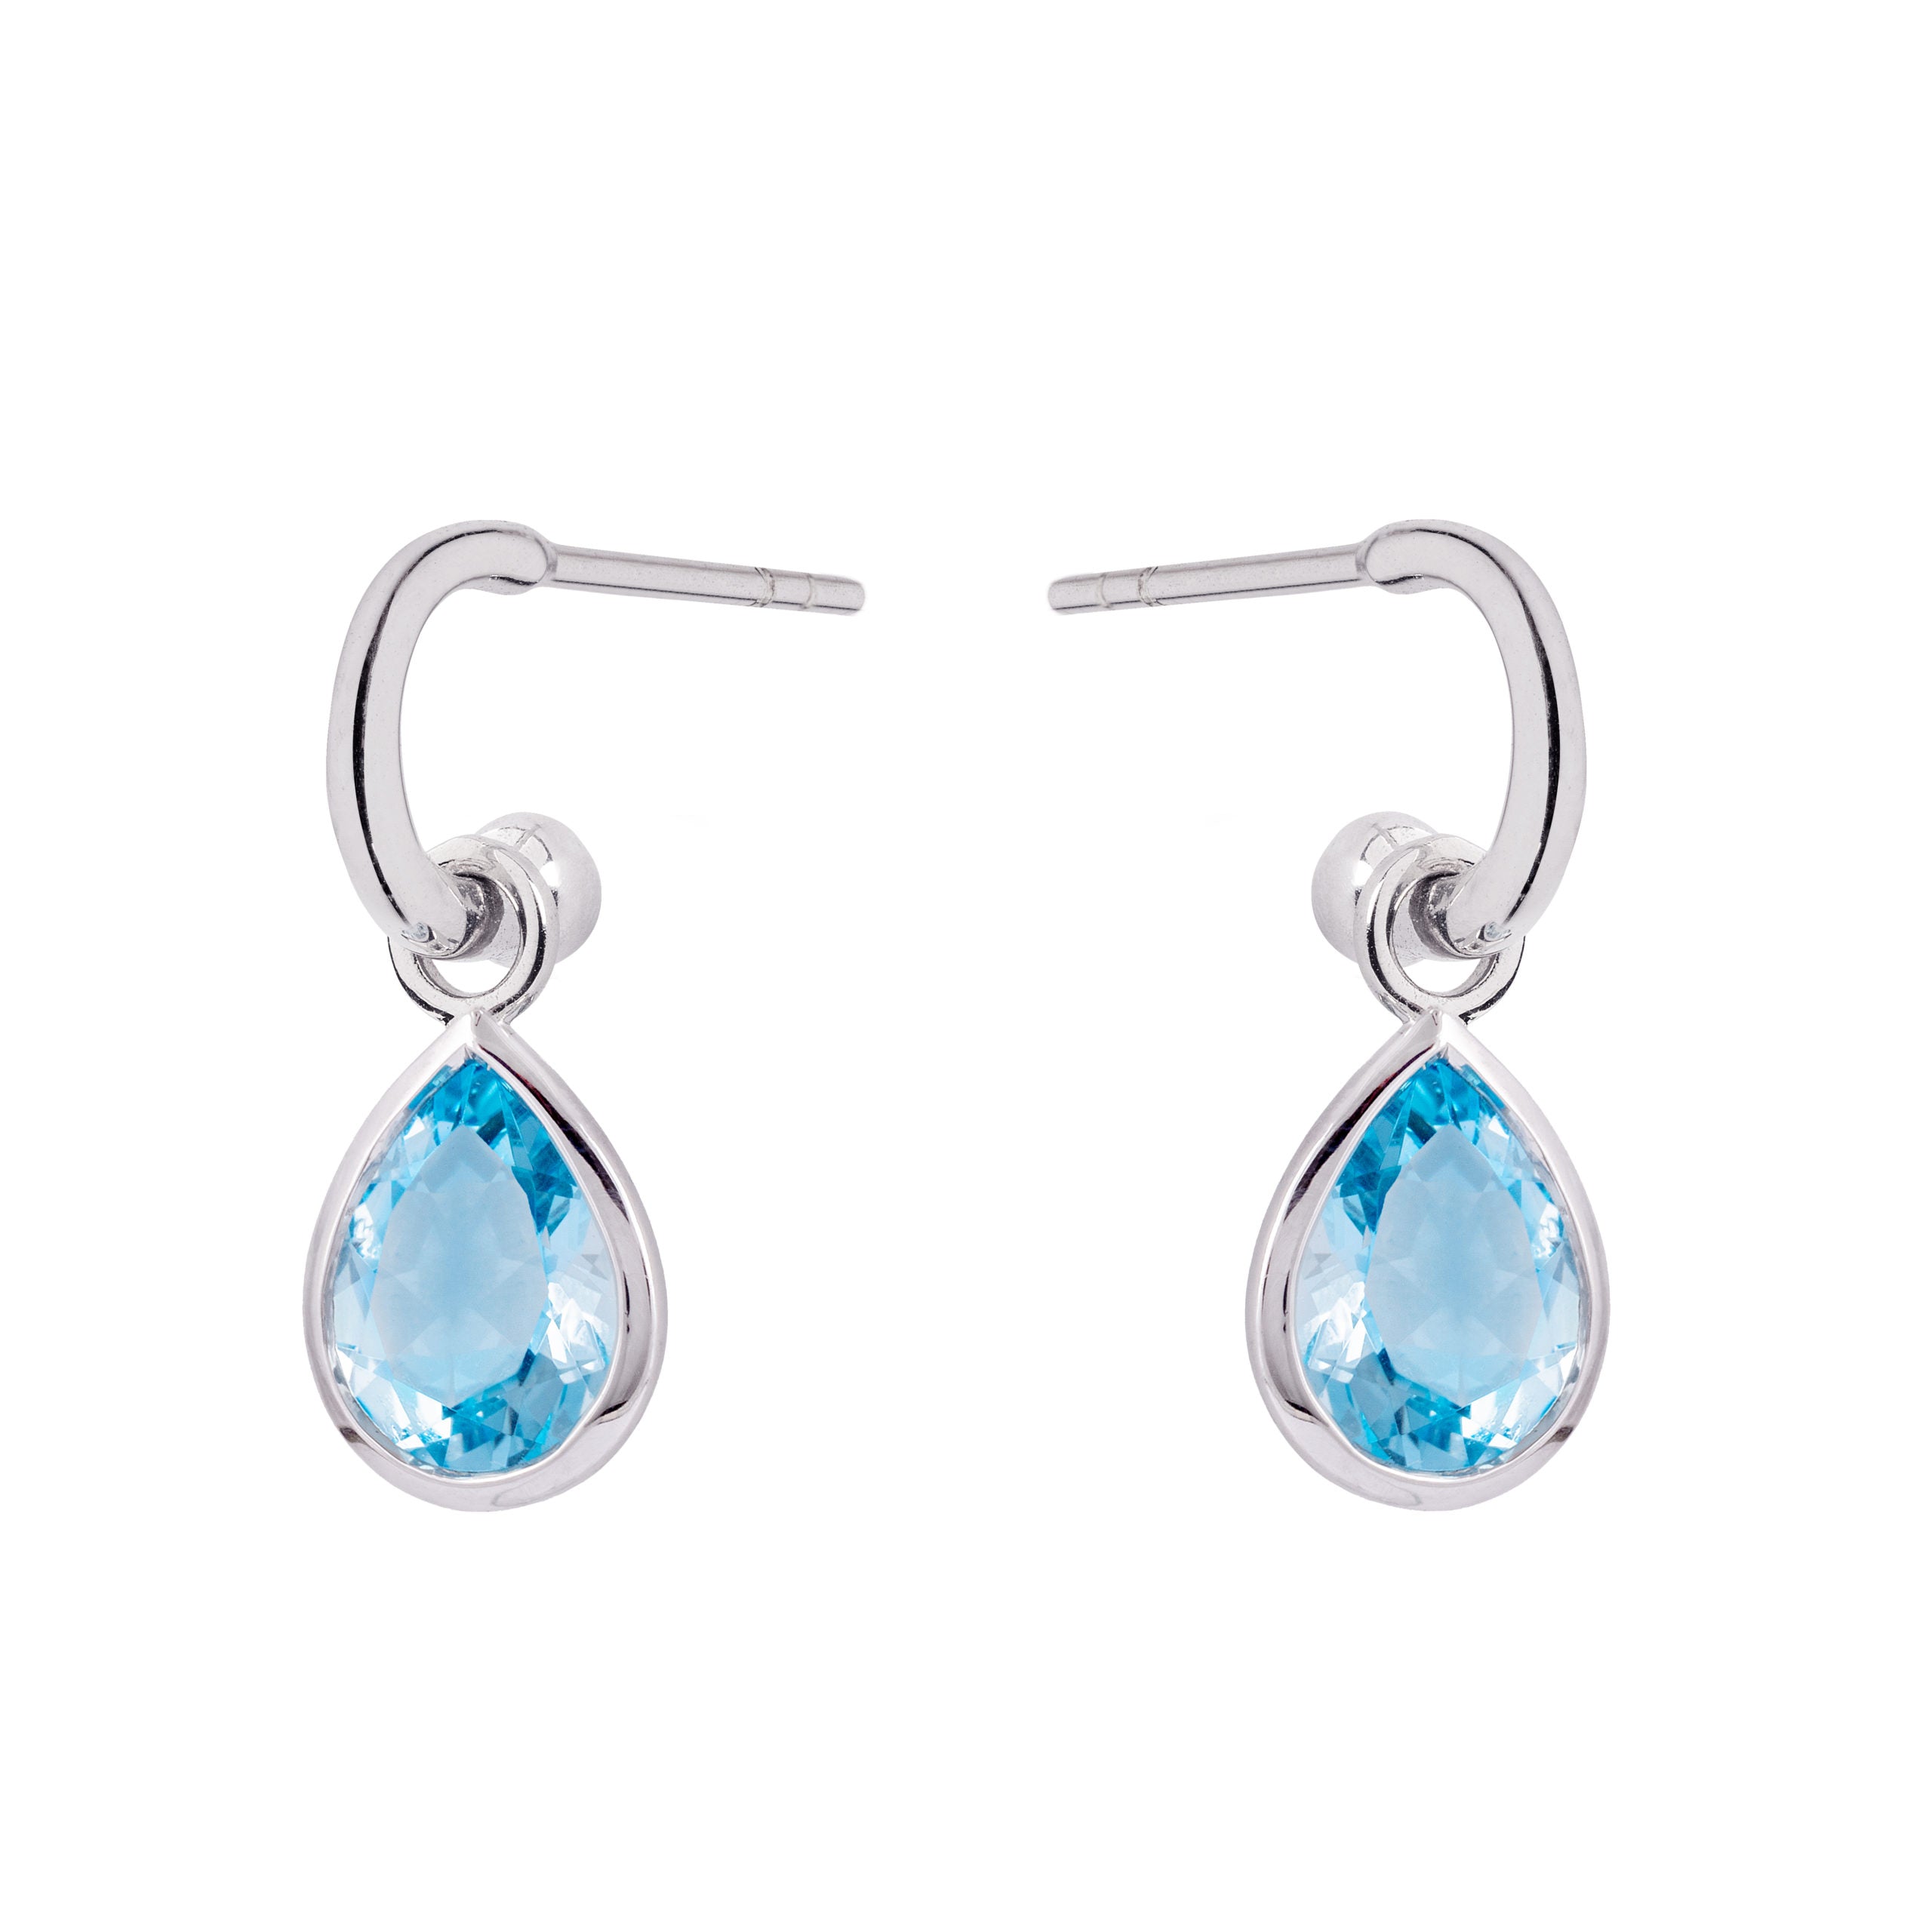 9ct White Gold Hoop Earrings with Detachable Blue Topaz Pear Drops